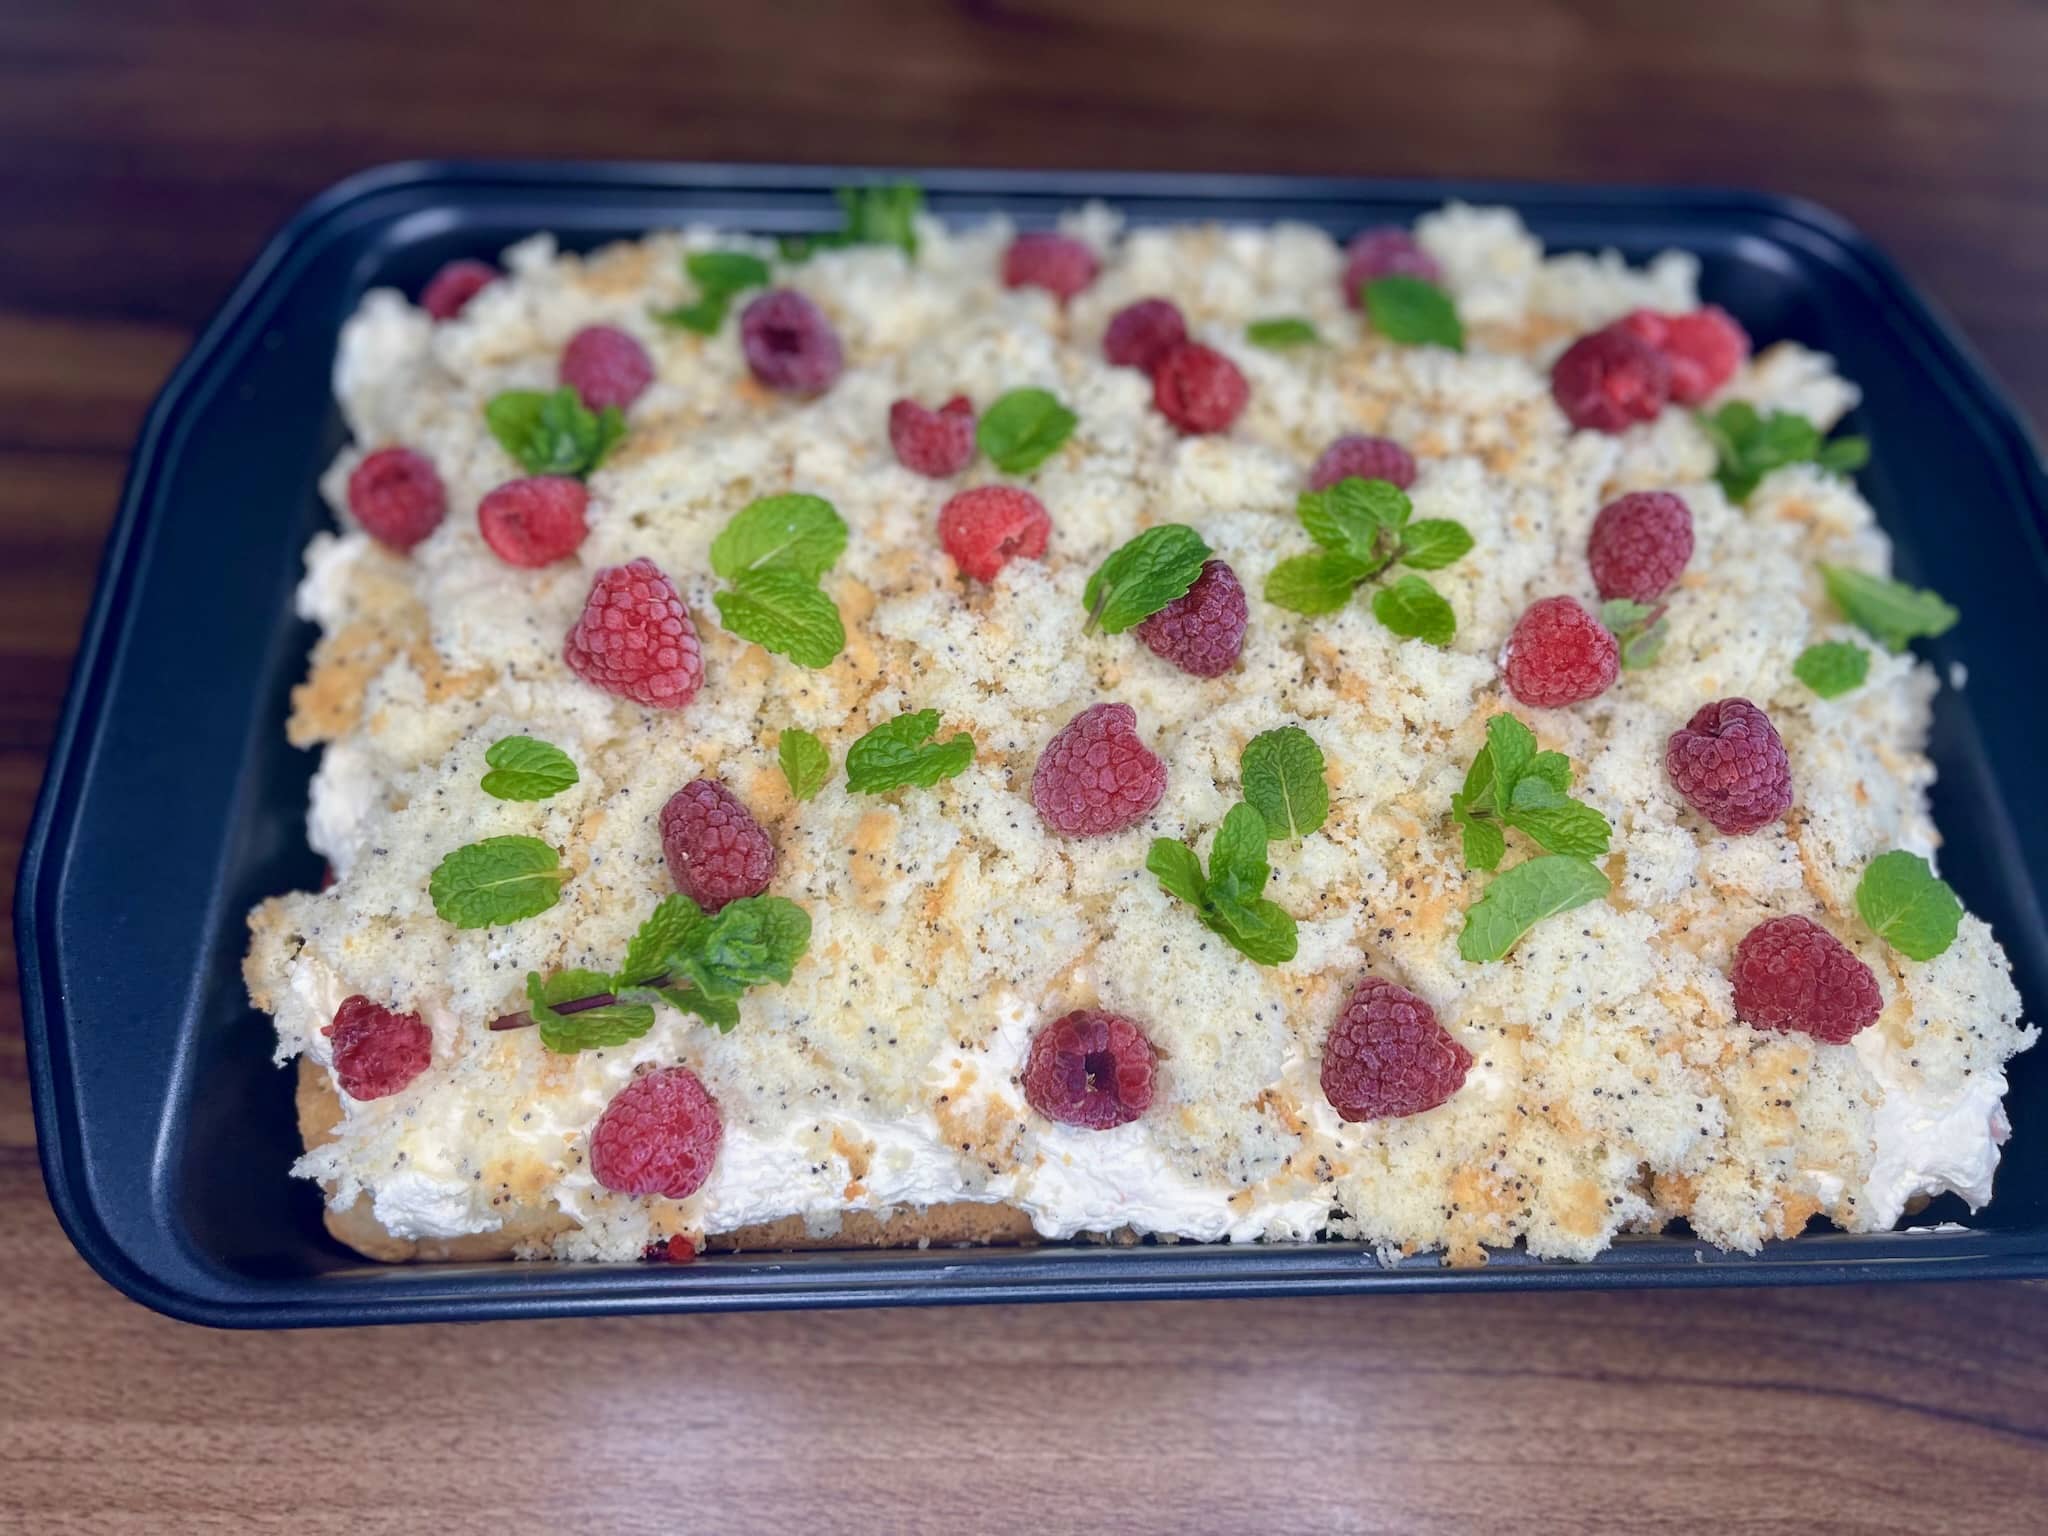 Cake decorated with mint and raspberries on top of the crumble